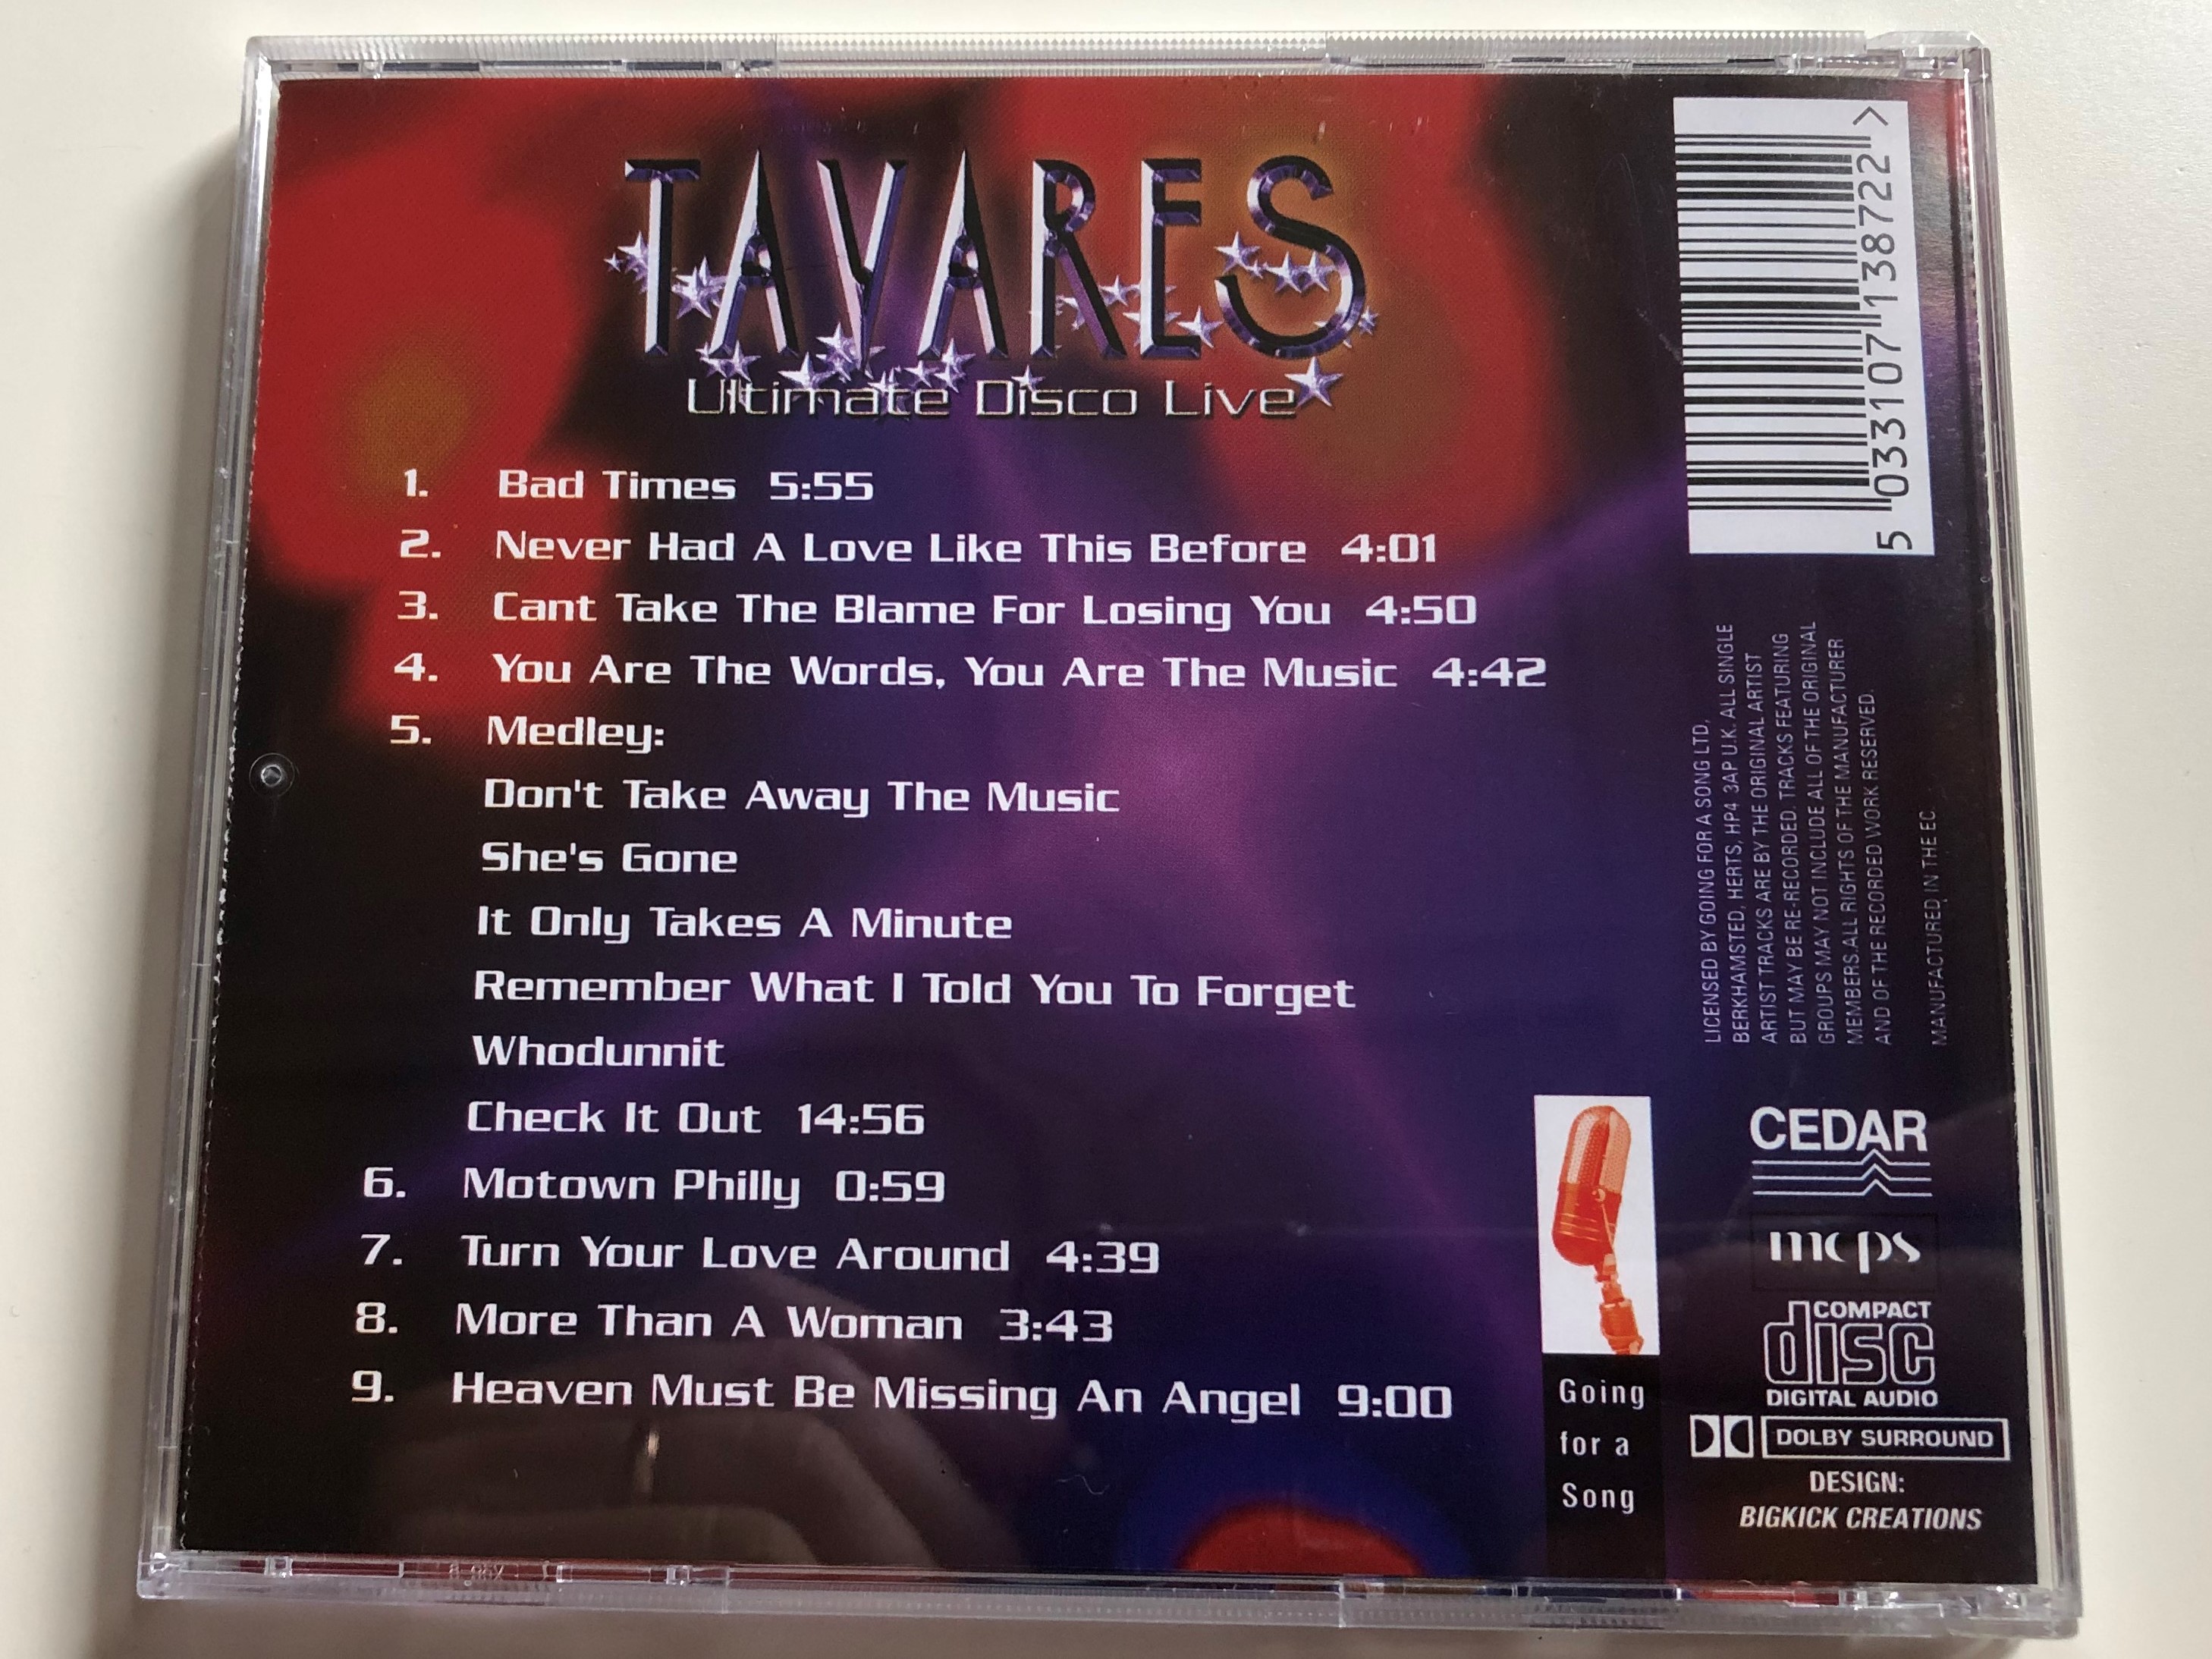 tavares-ultimate-disco-live-never-had-a-love-like-this-before-don-t-take-away-the-music-it-only-takes-a-minute-more-than-a-woman-and-many-more-going-for-a-song-audio-cd-gfs387-5-.jpg